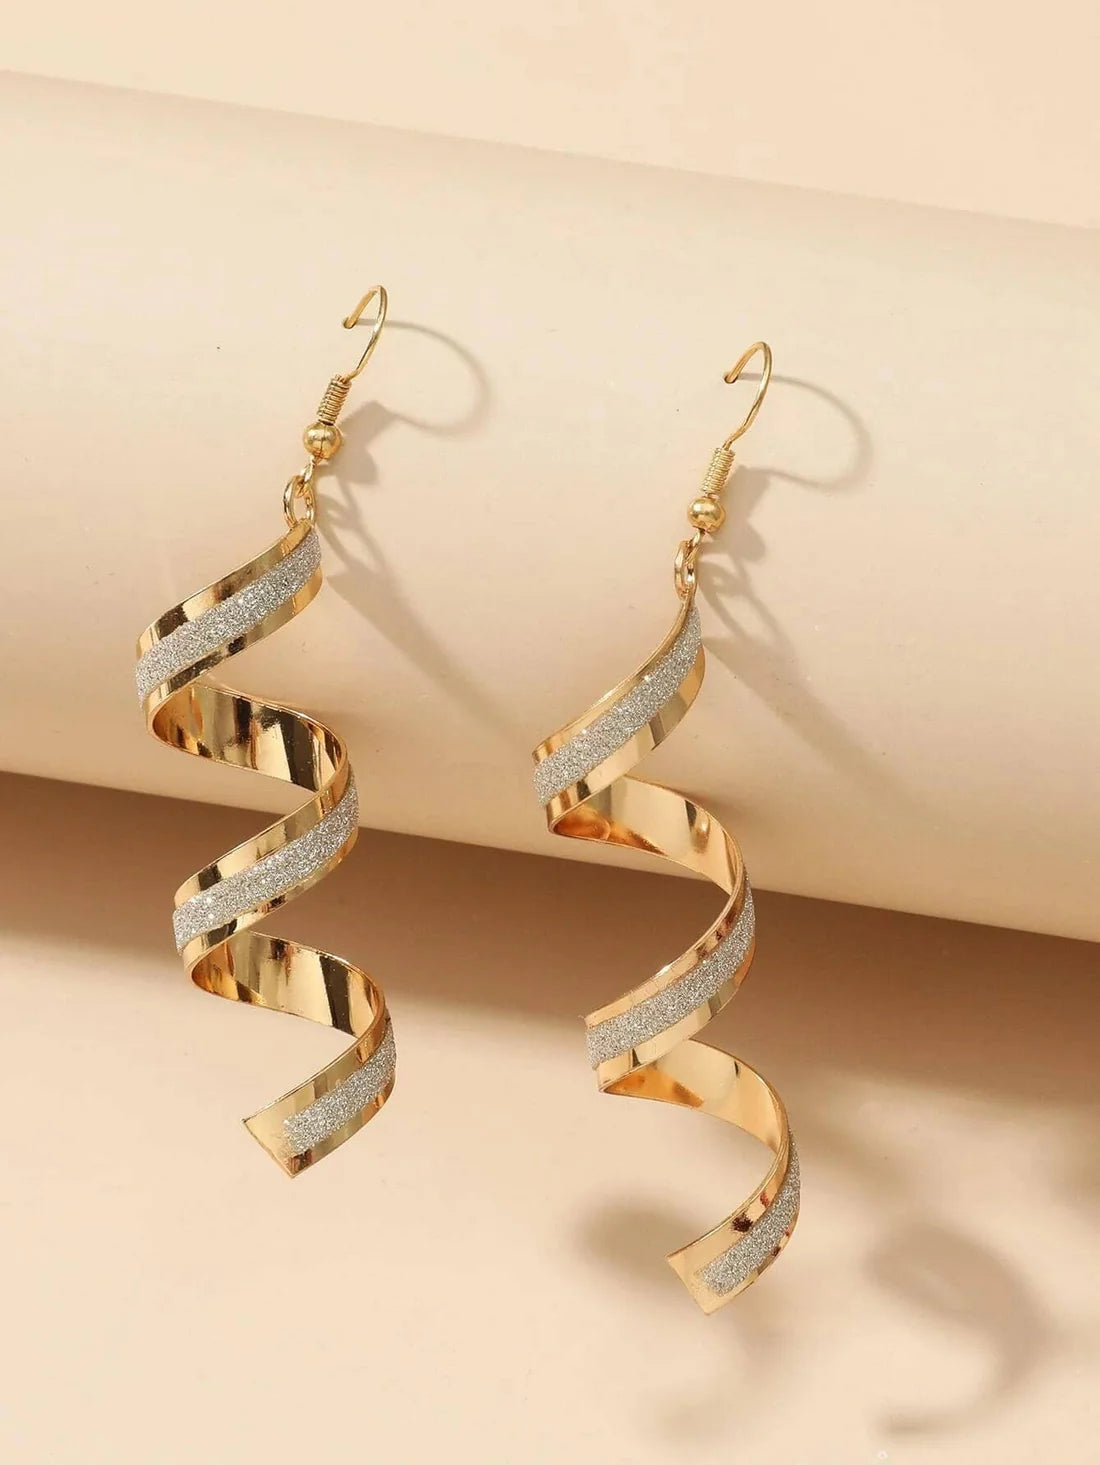 Spiral Shiny Curved Personality Earrings